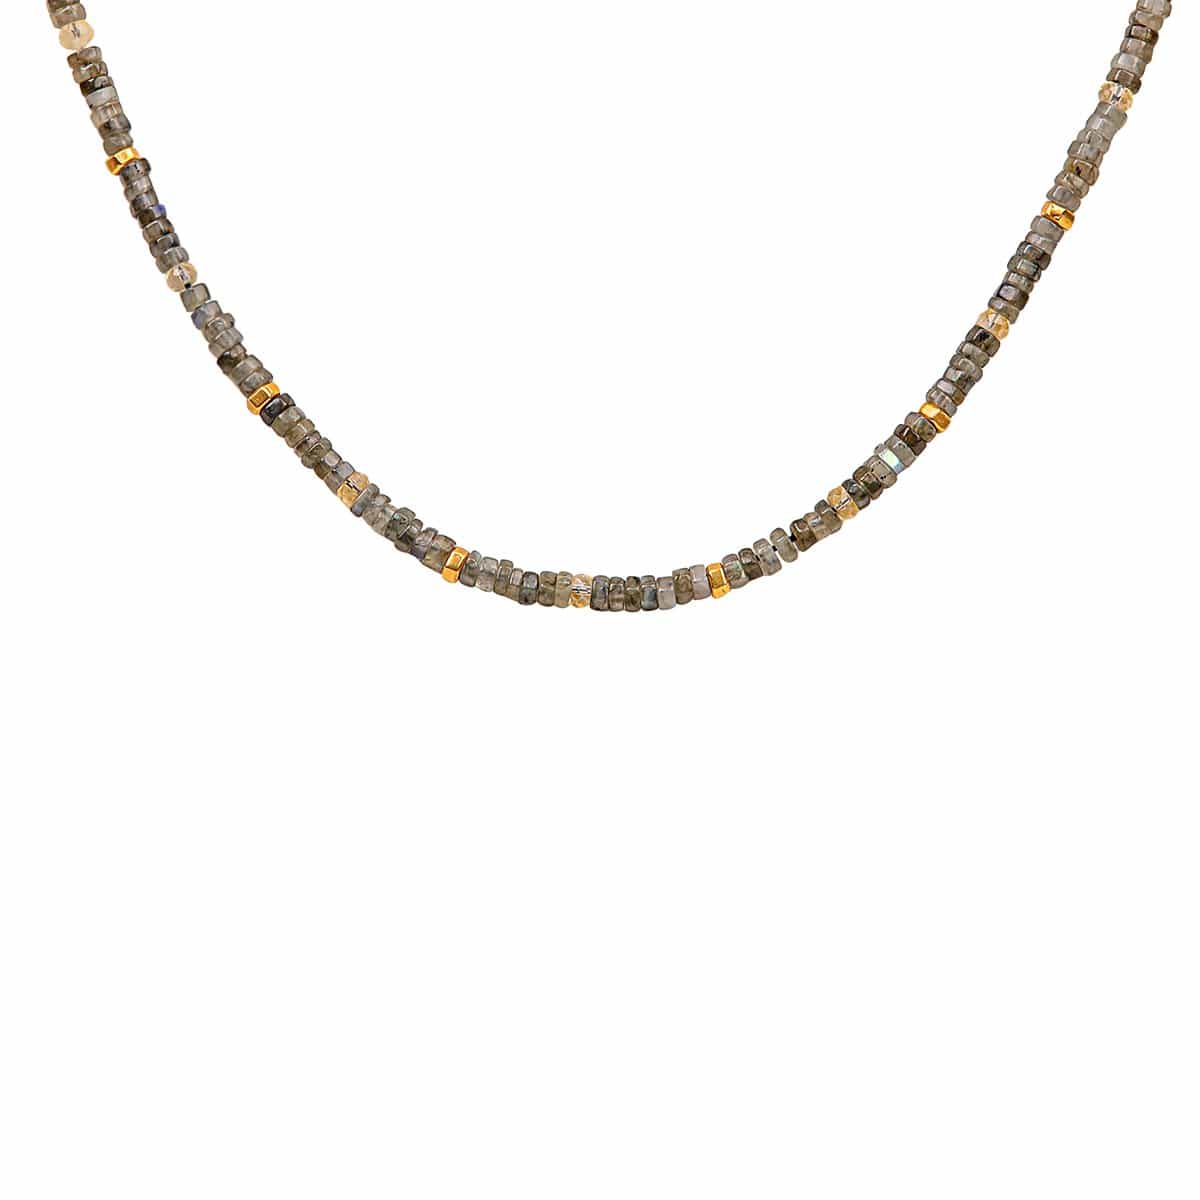 Karma and Luck  Necklace  -  "*Base Metal:- Brass  *Gold Plated  Make as Choker Necklace 14-16 inches    Gemstone:- Labradorite Hexagon Heishi 4mm with some Citrine sprinkled    *Lobster Lock"